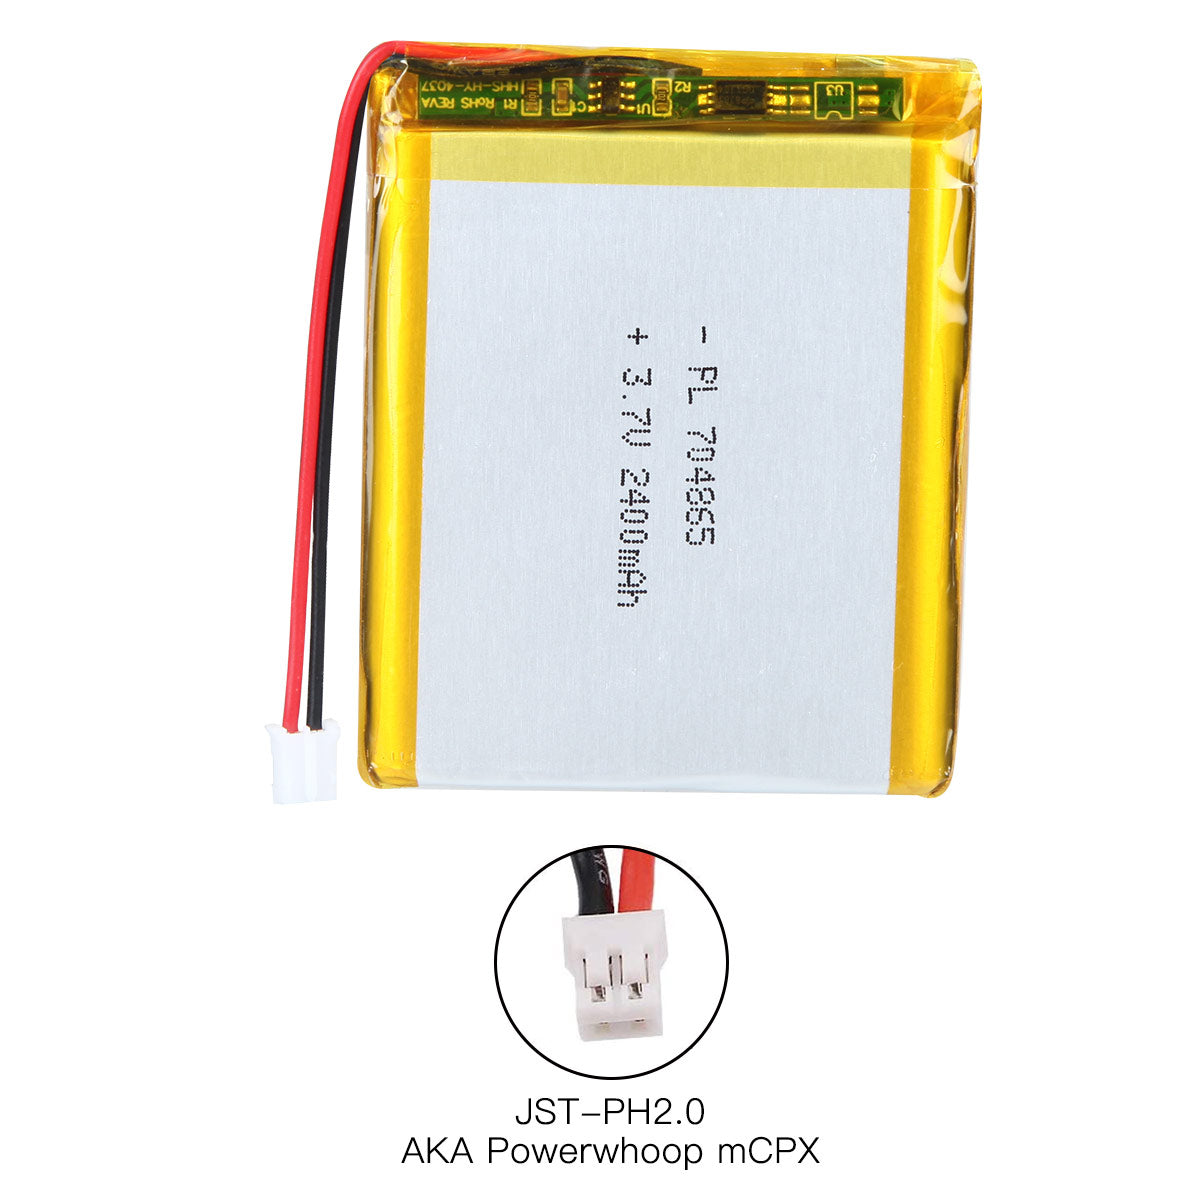 YDL 3.7V 2400mAh 704865 Rechargeable Lithium Polymer Battery